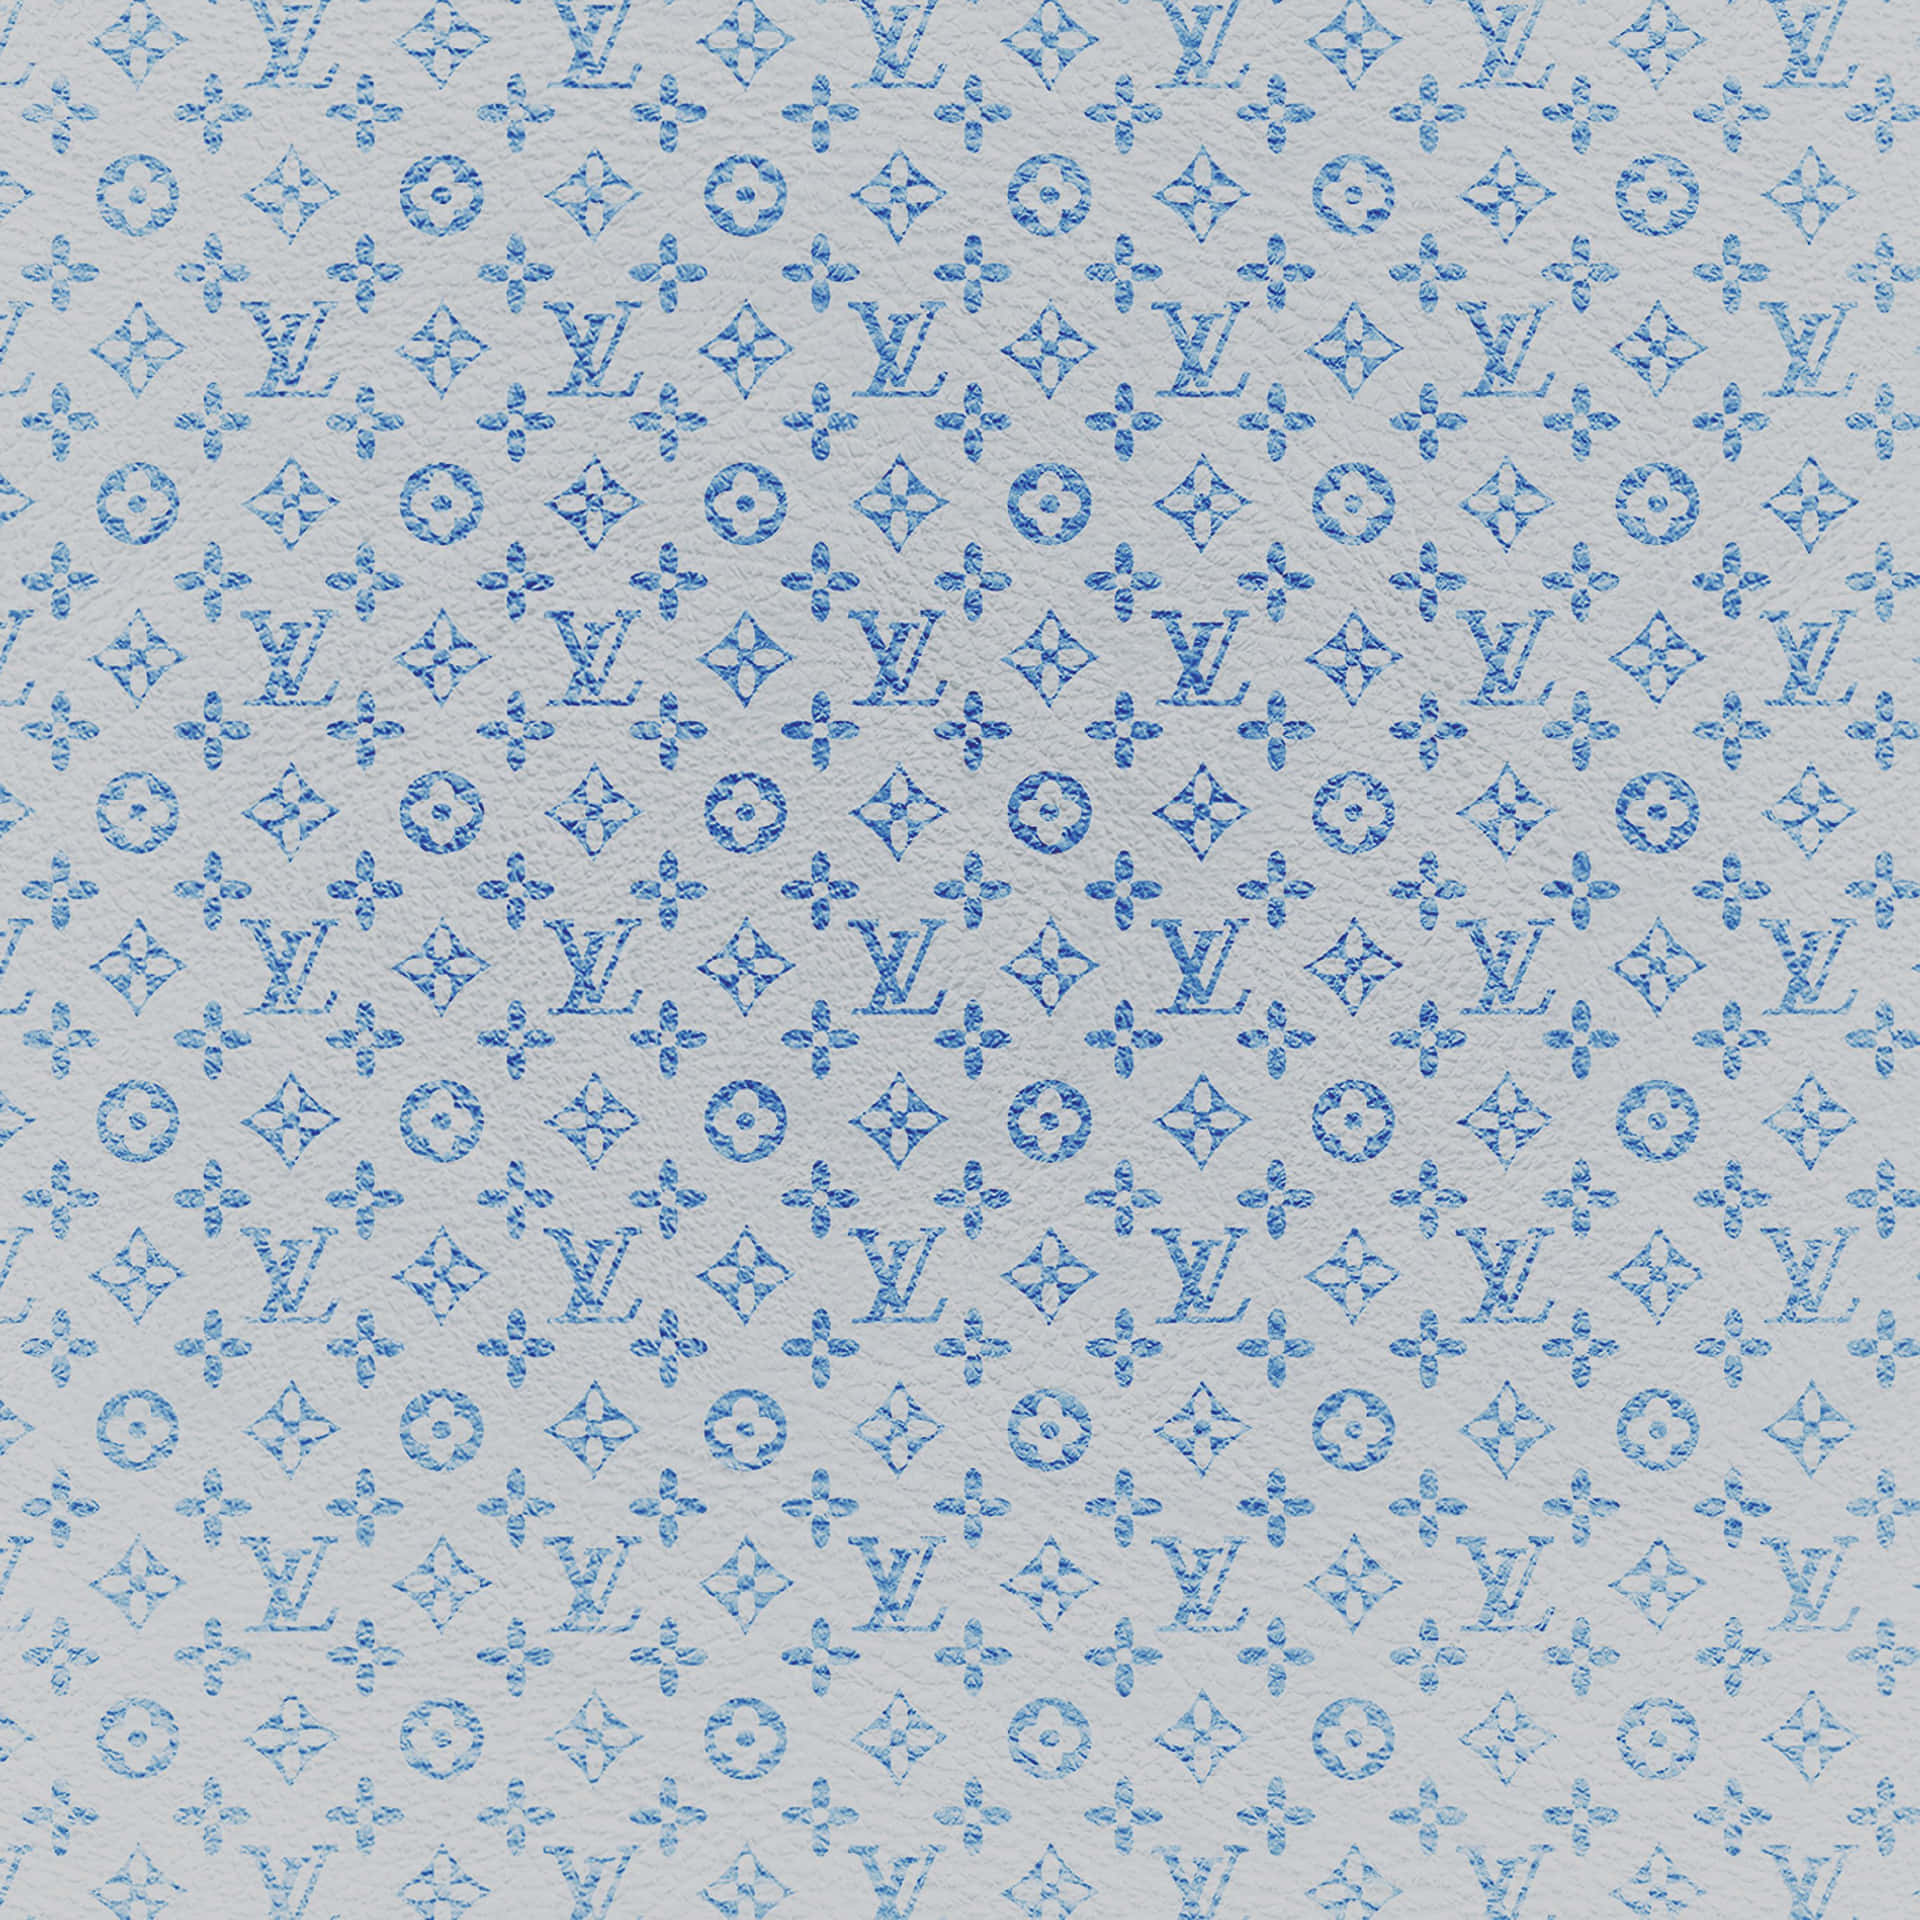 063 of 365  3D Louis Vuitton Wallpaper Check out my page for a